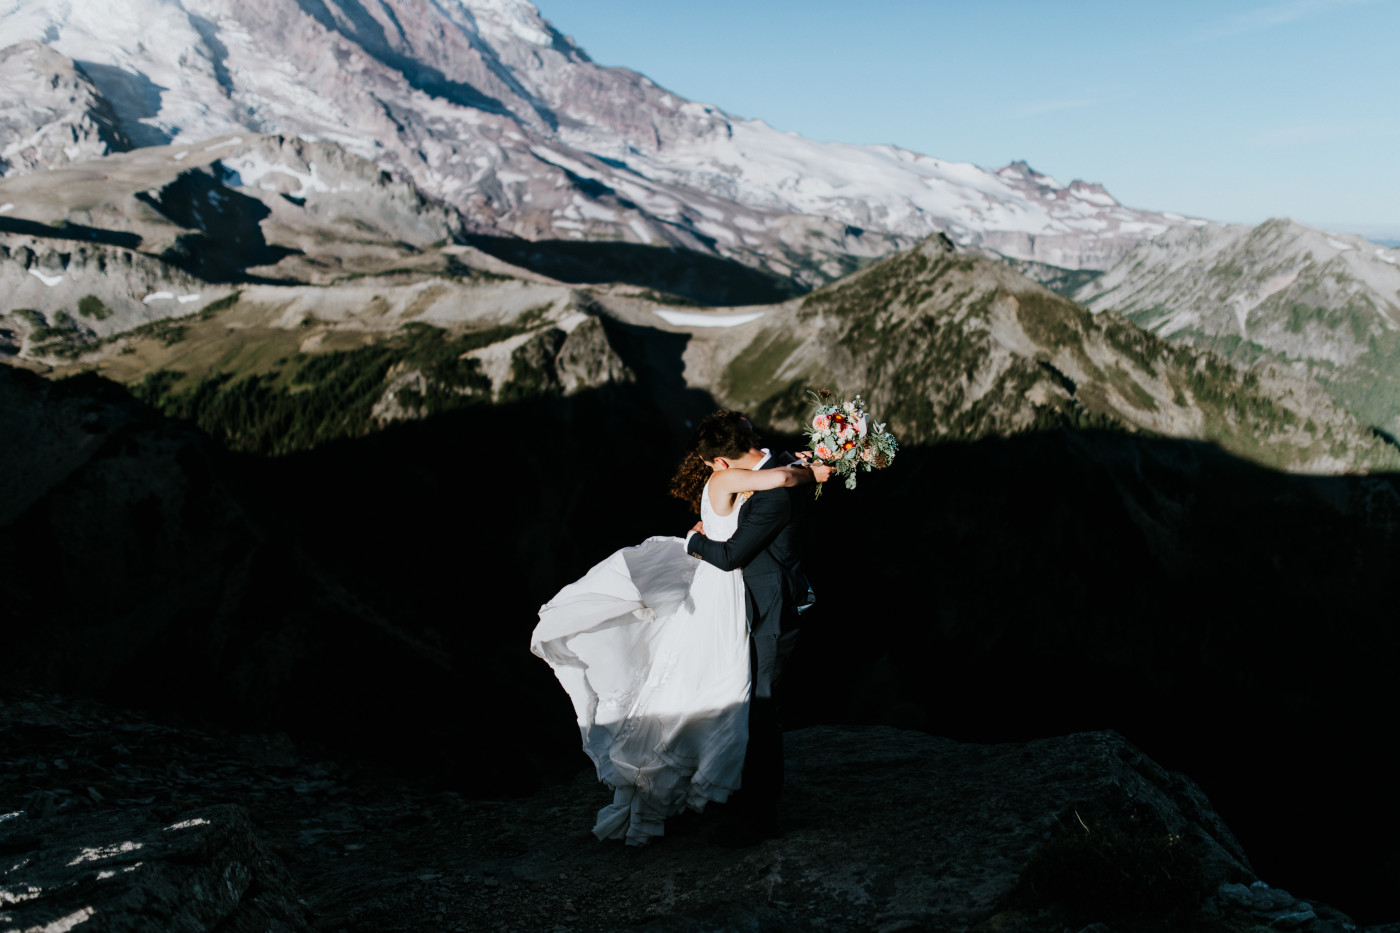 Chad and Tasha with a view of the mountain behind them. Elopement photography at Mount Rainier by Sienna Plus Josh.